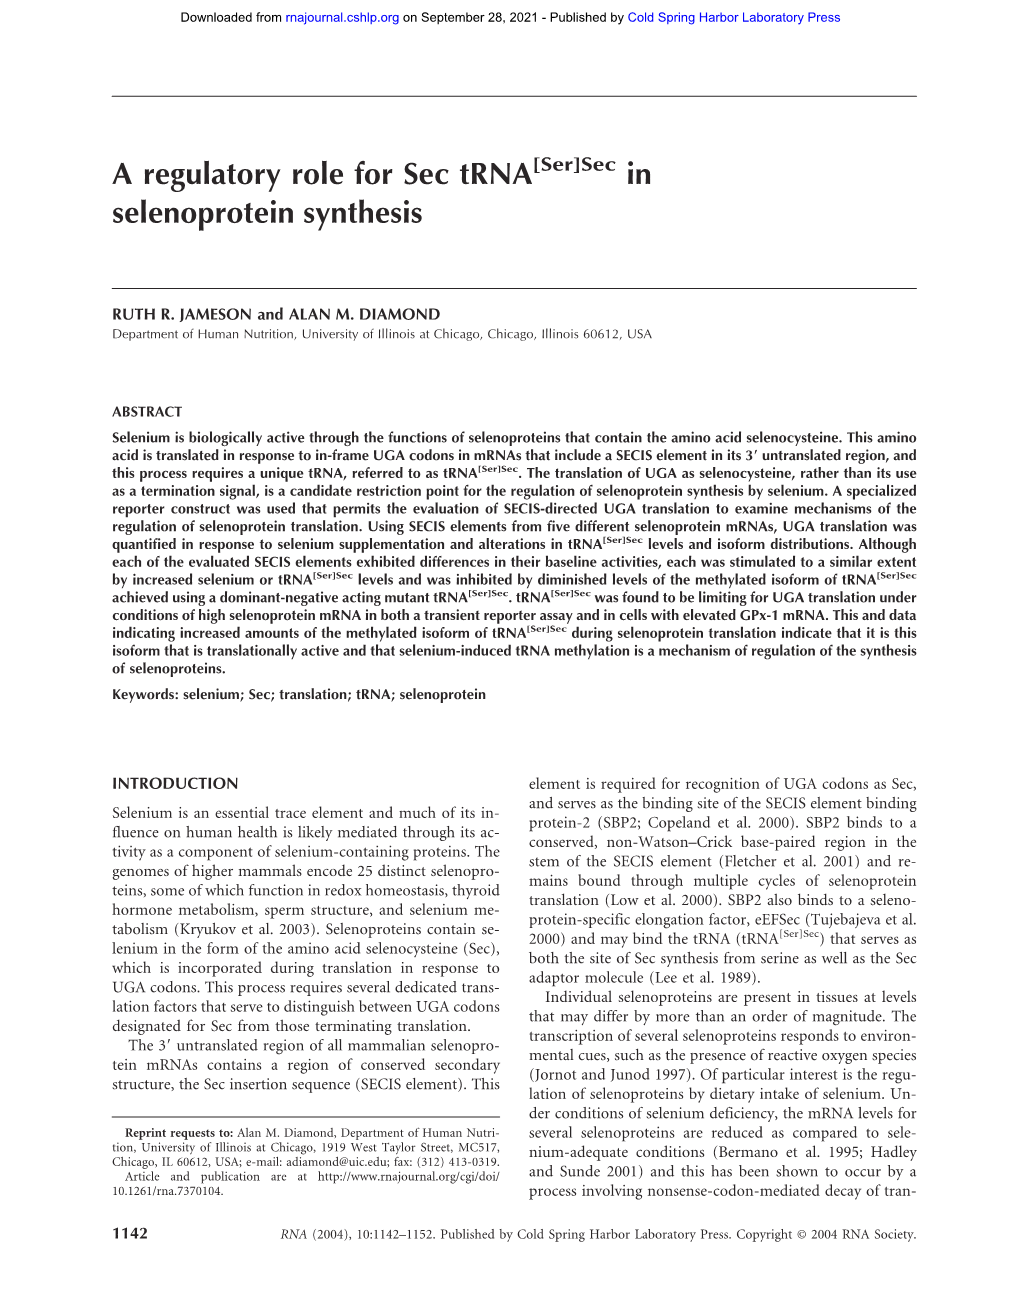 A Regulatory Role for Sec Trna in Selenoprotein Synthesis